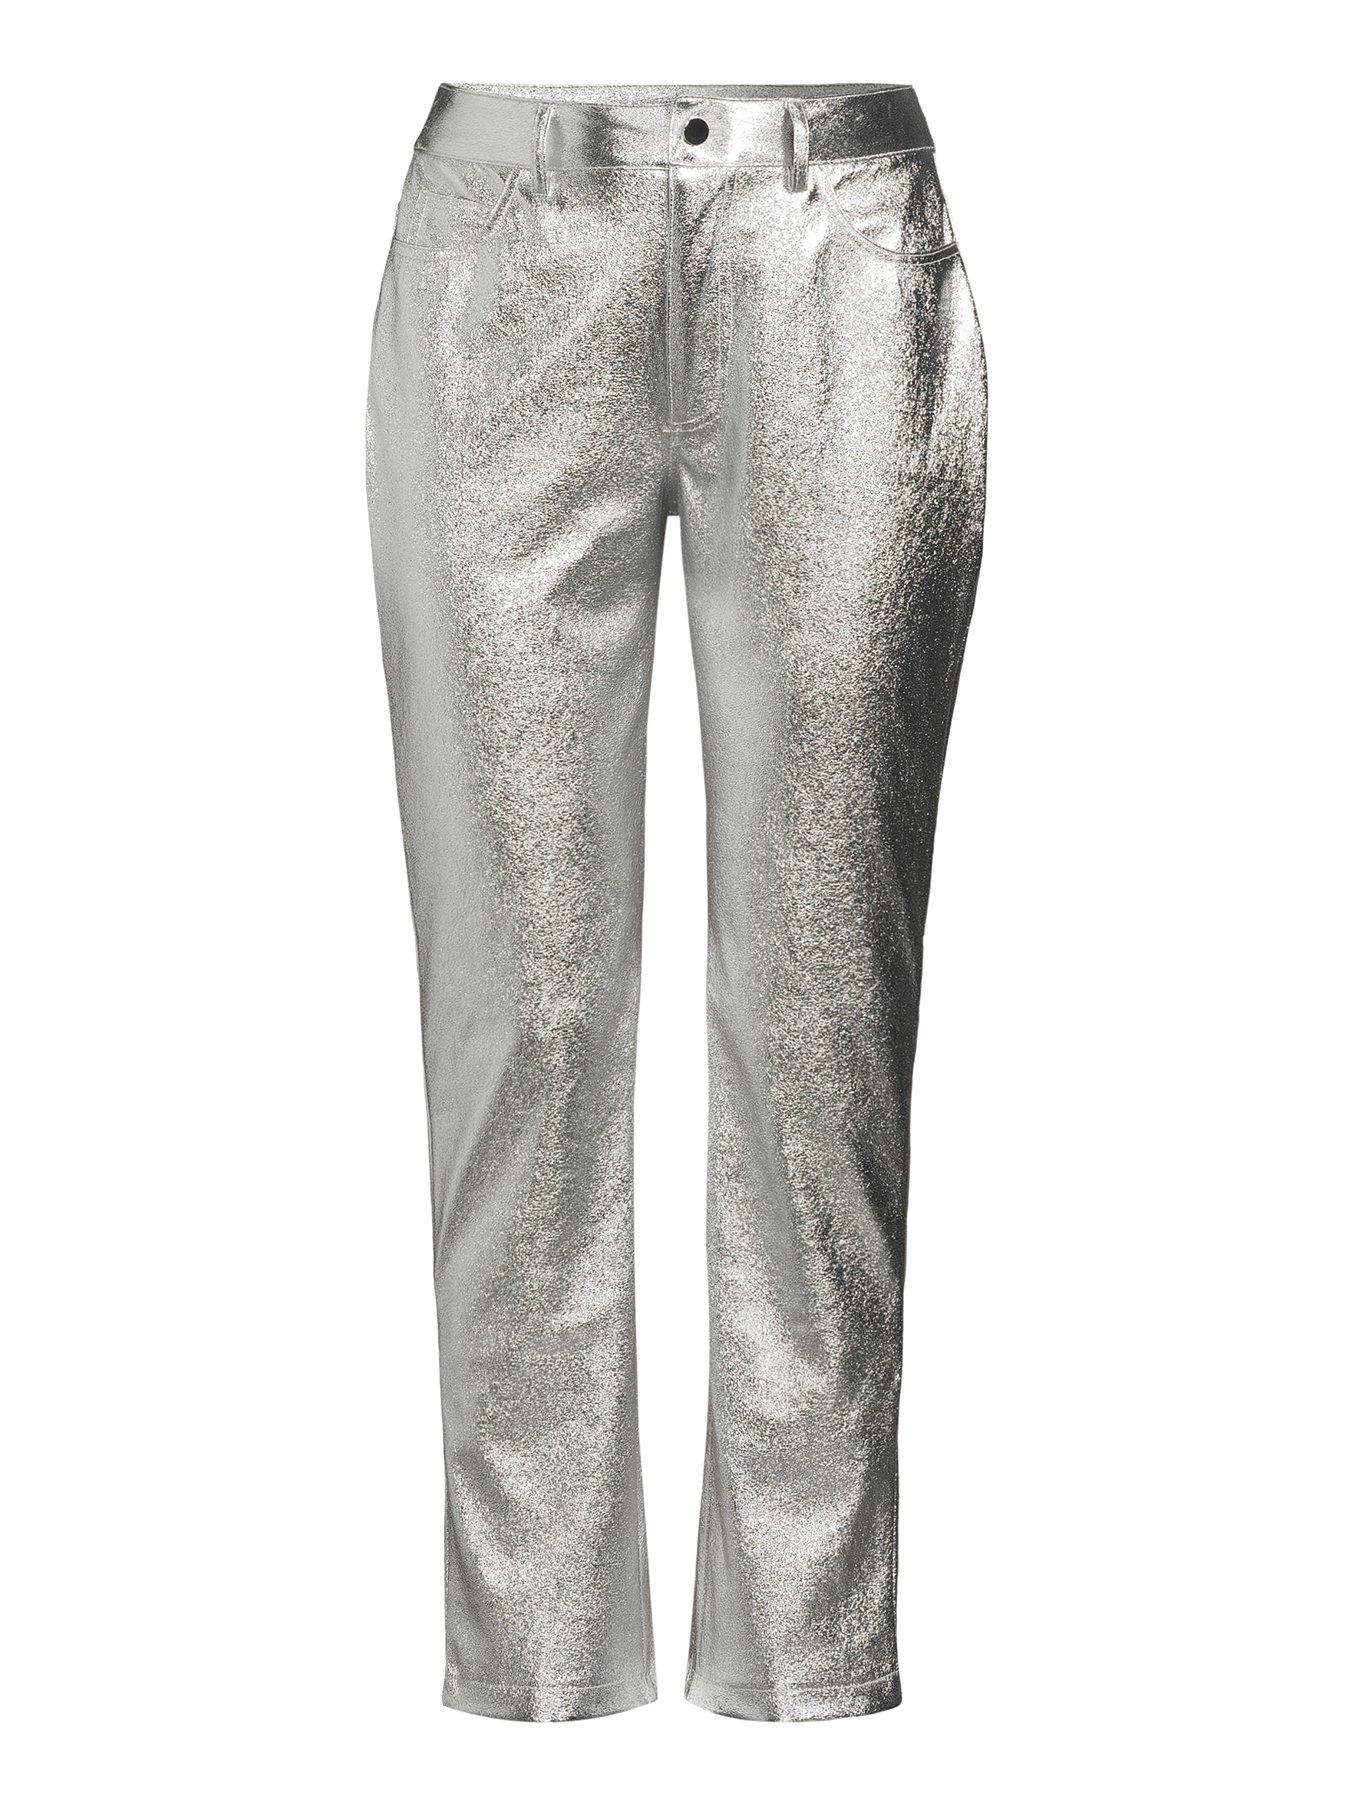 V by Very X Style Fairy Metallic Mom Jeans - Silver